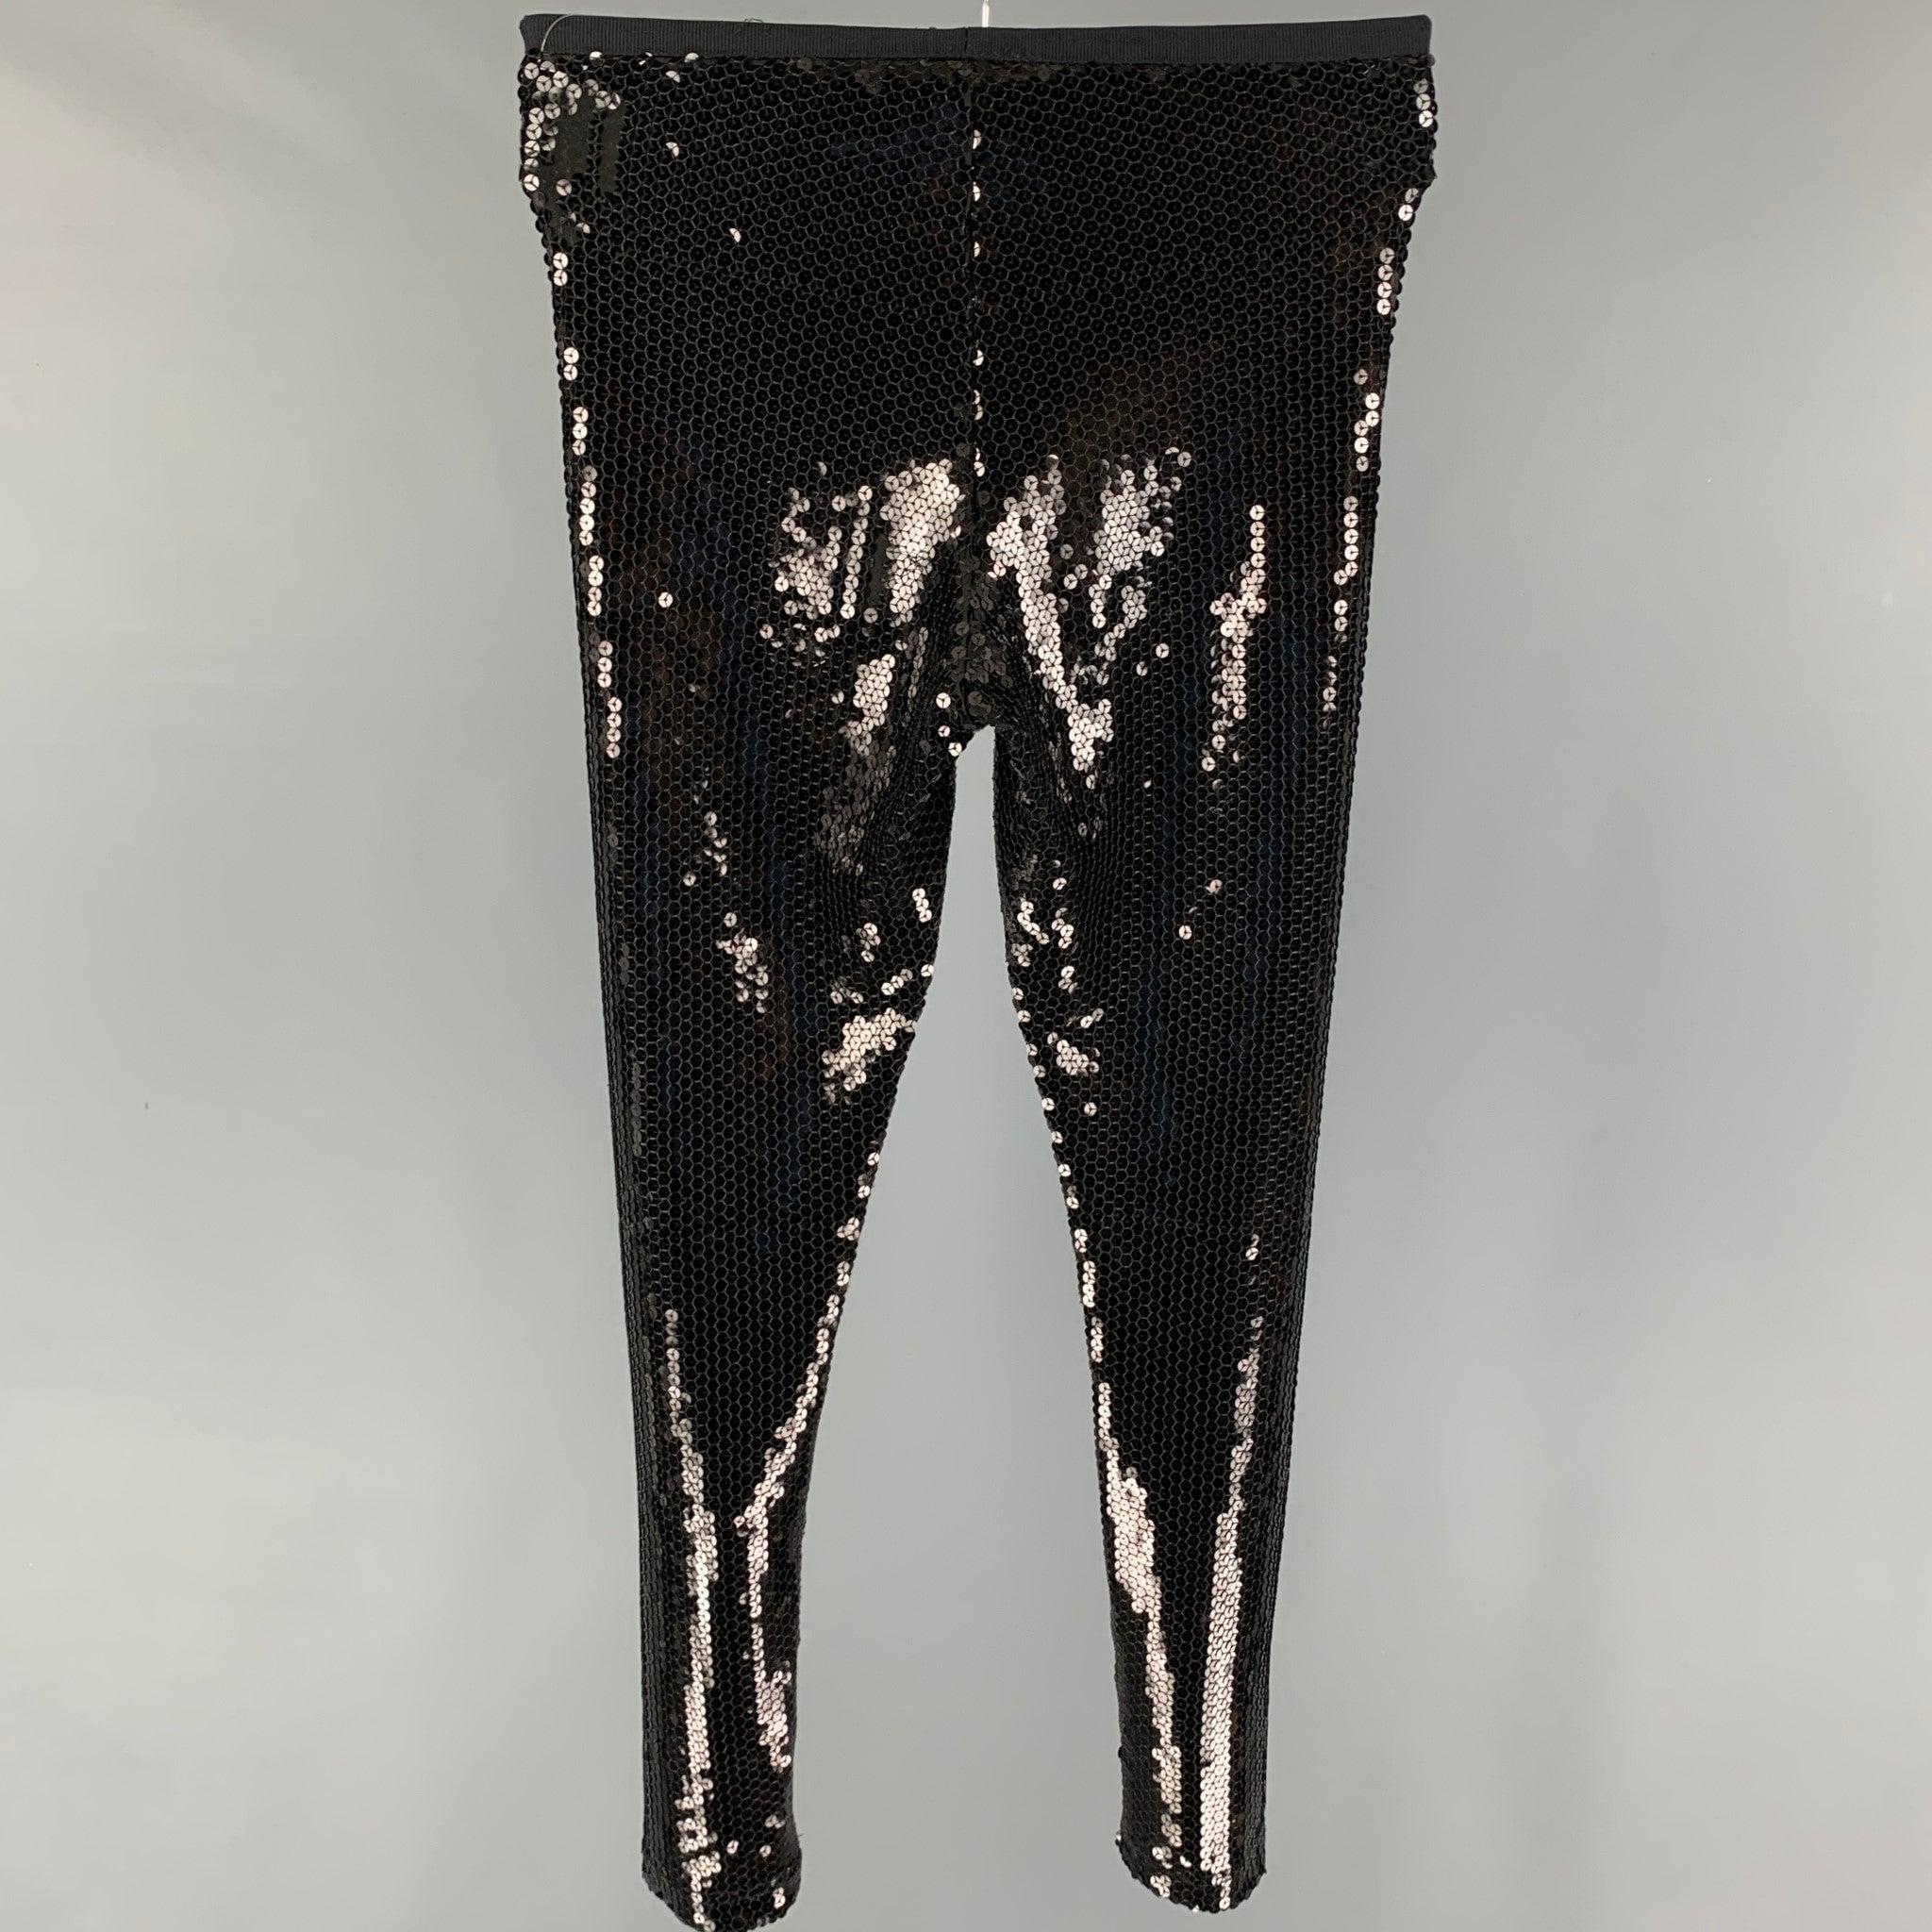 MARC JACOBS leggings comes in a black sequined polyester featuring a elastic ribbon waist.
 Good
 Pre-Owned Condition. Moderate wear. As-is.  
 

 Marked:  0 
 

 Measurements: 
  Waist: 25 inches Rise: 10 inches Inseam: 28 inches Leg Opening: 10